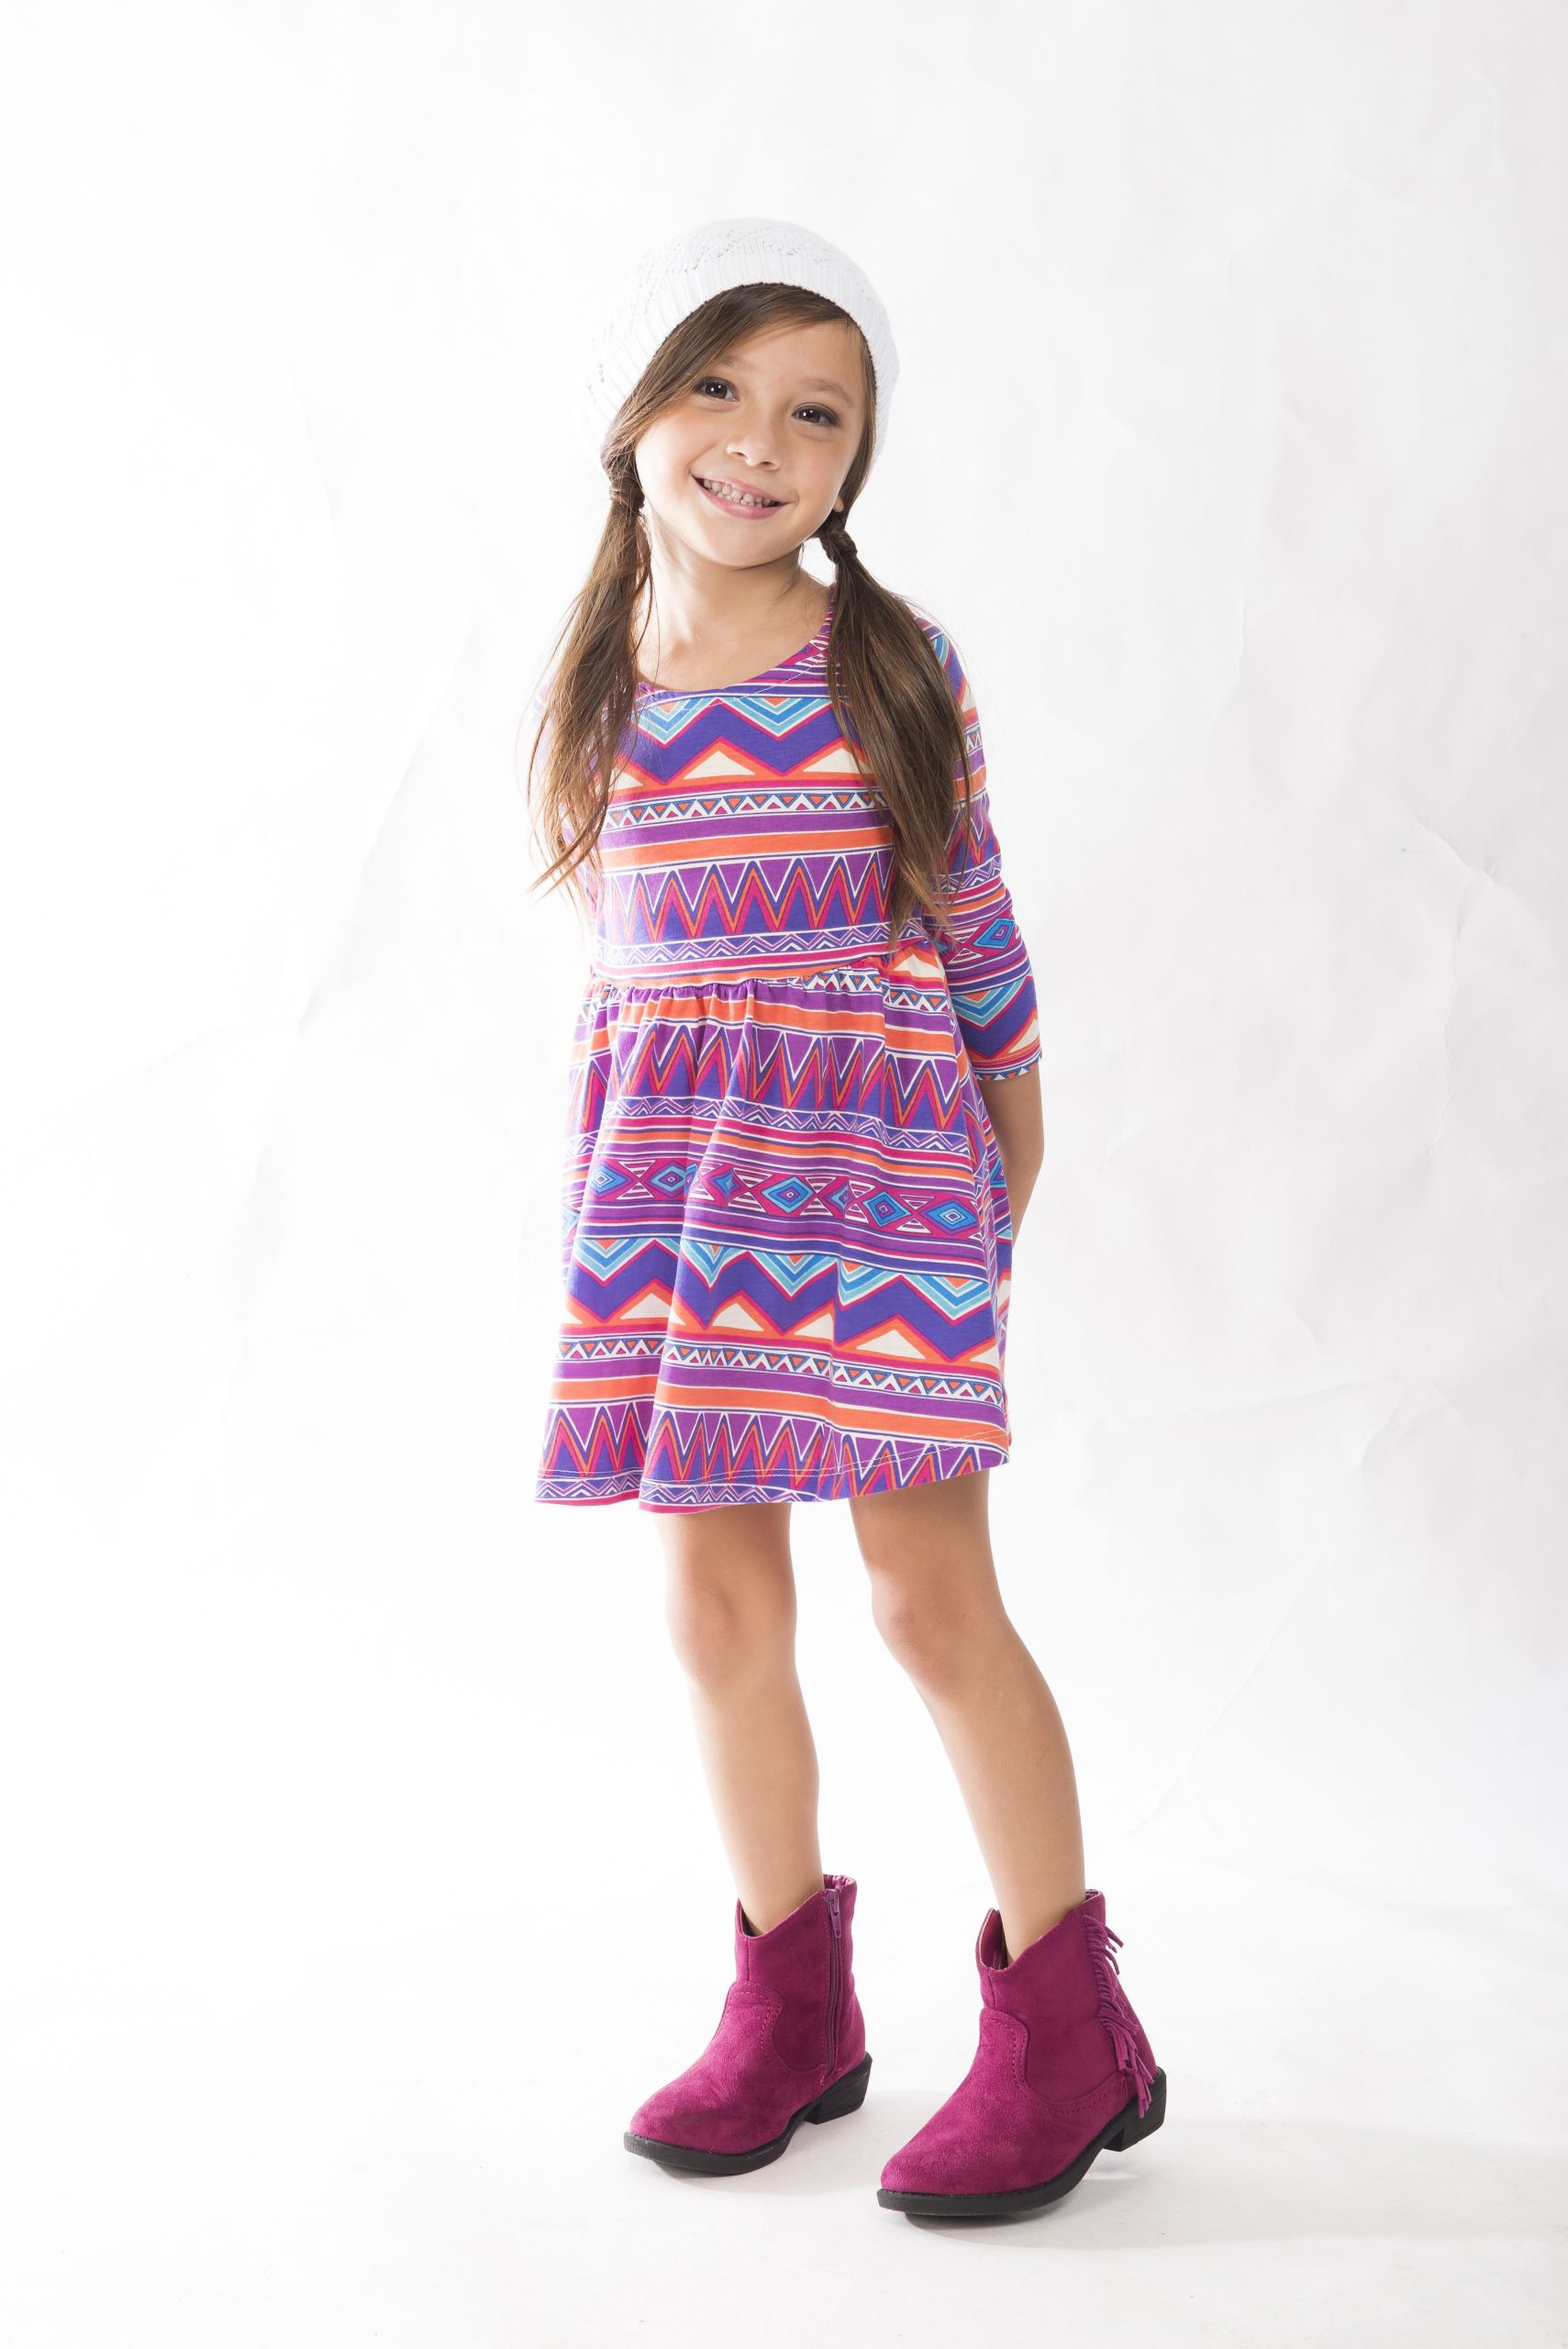 Kids Fashion Model
 Stylish Clothes Kids Love from FabKids